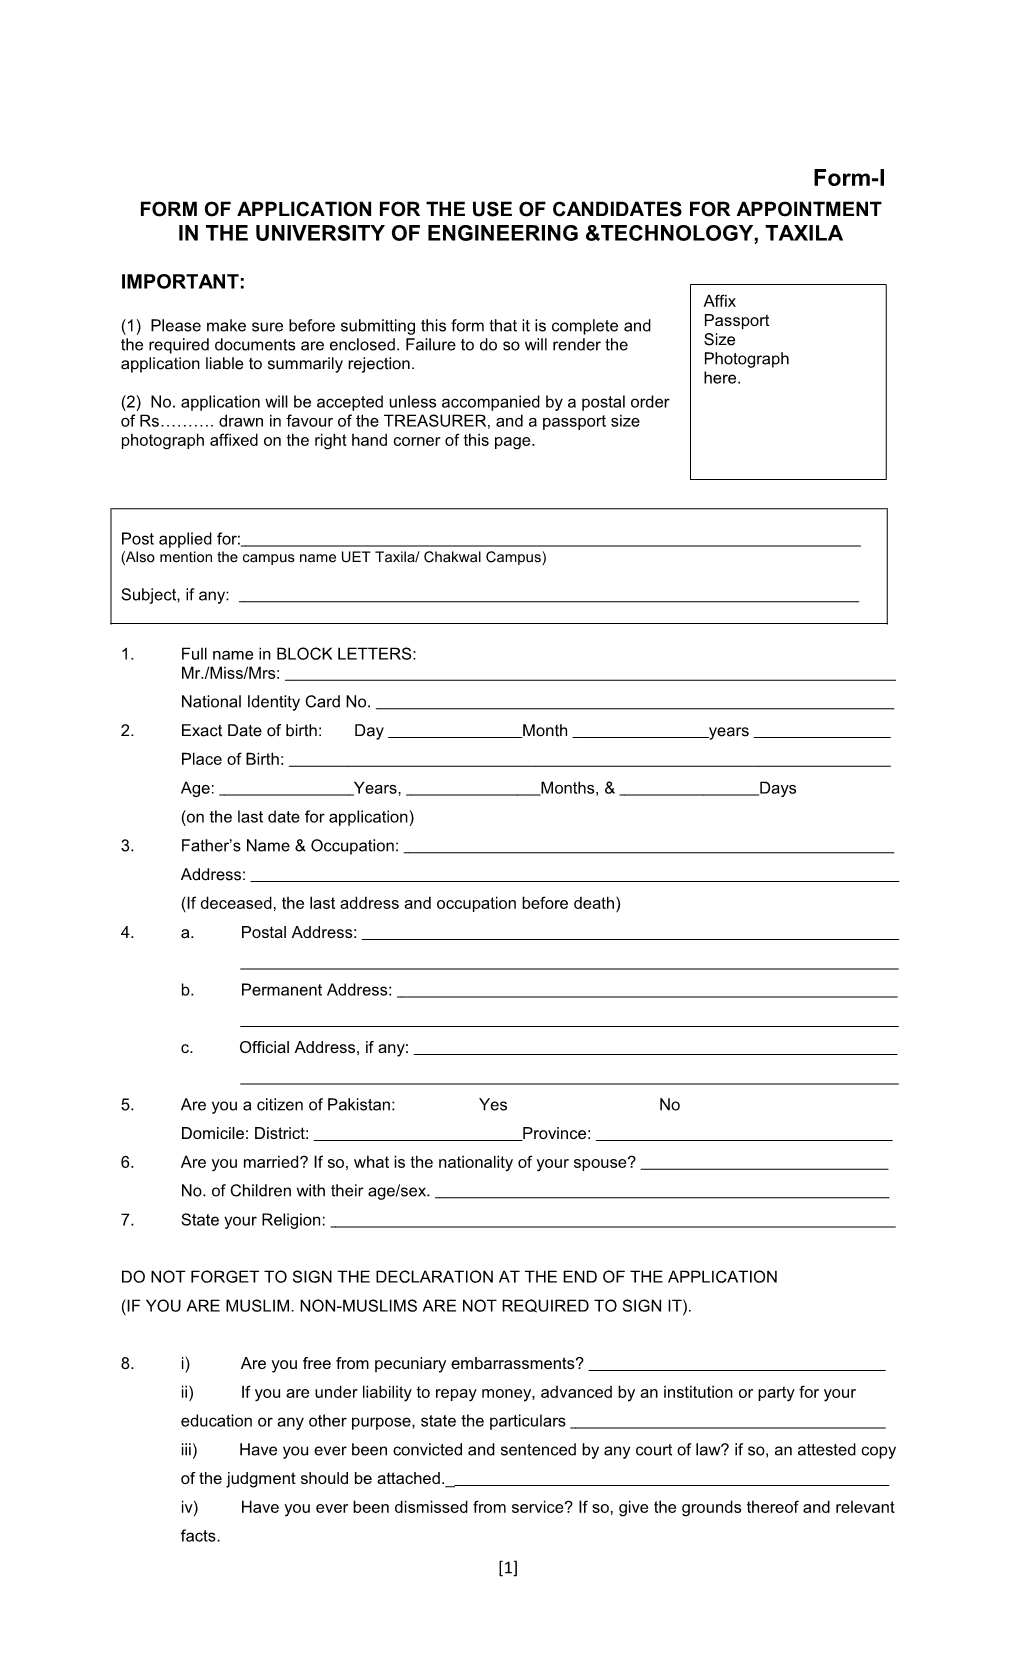 Form of Application for the Use of Candidates for Appointment